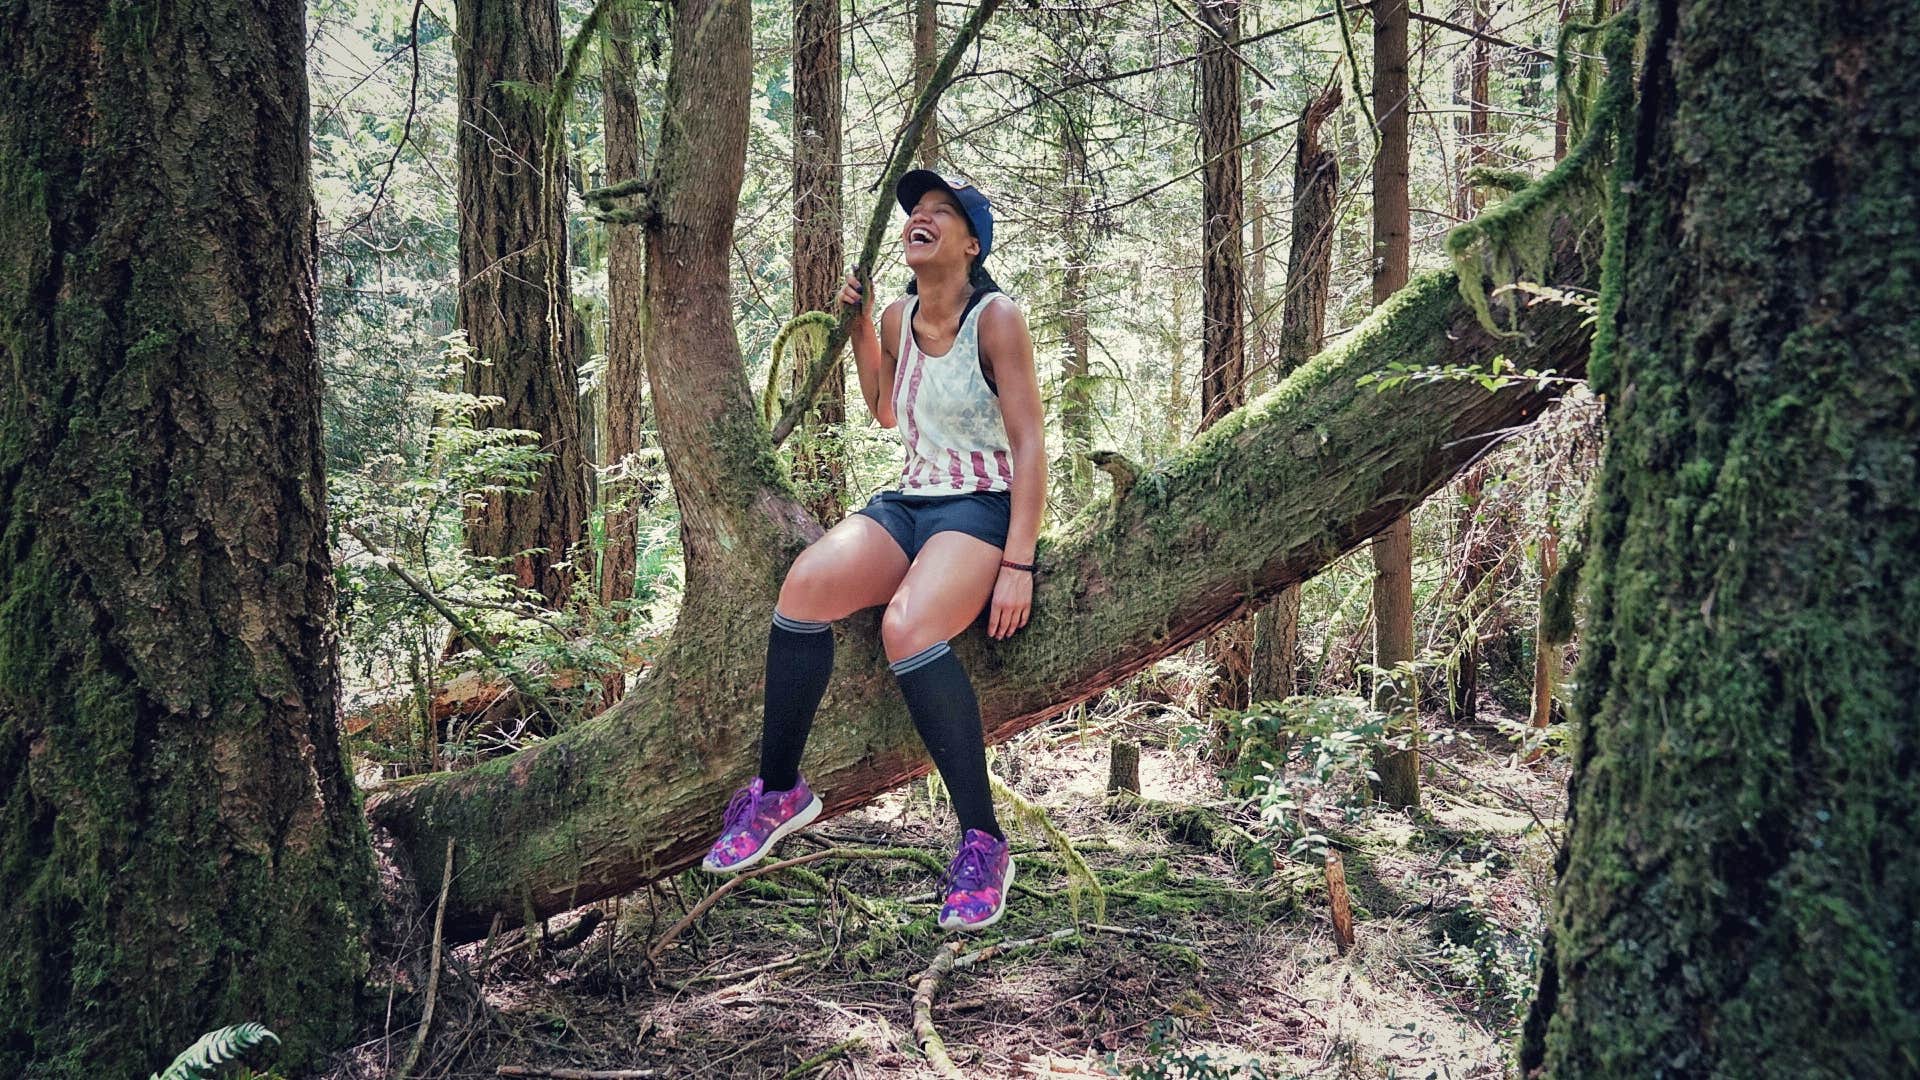 Just loving my  Lily Trotters Four Kisses Compression Socks and being in the woods